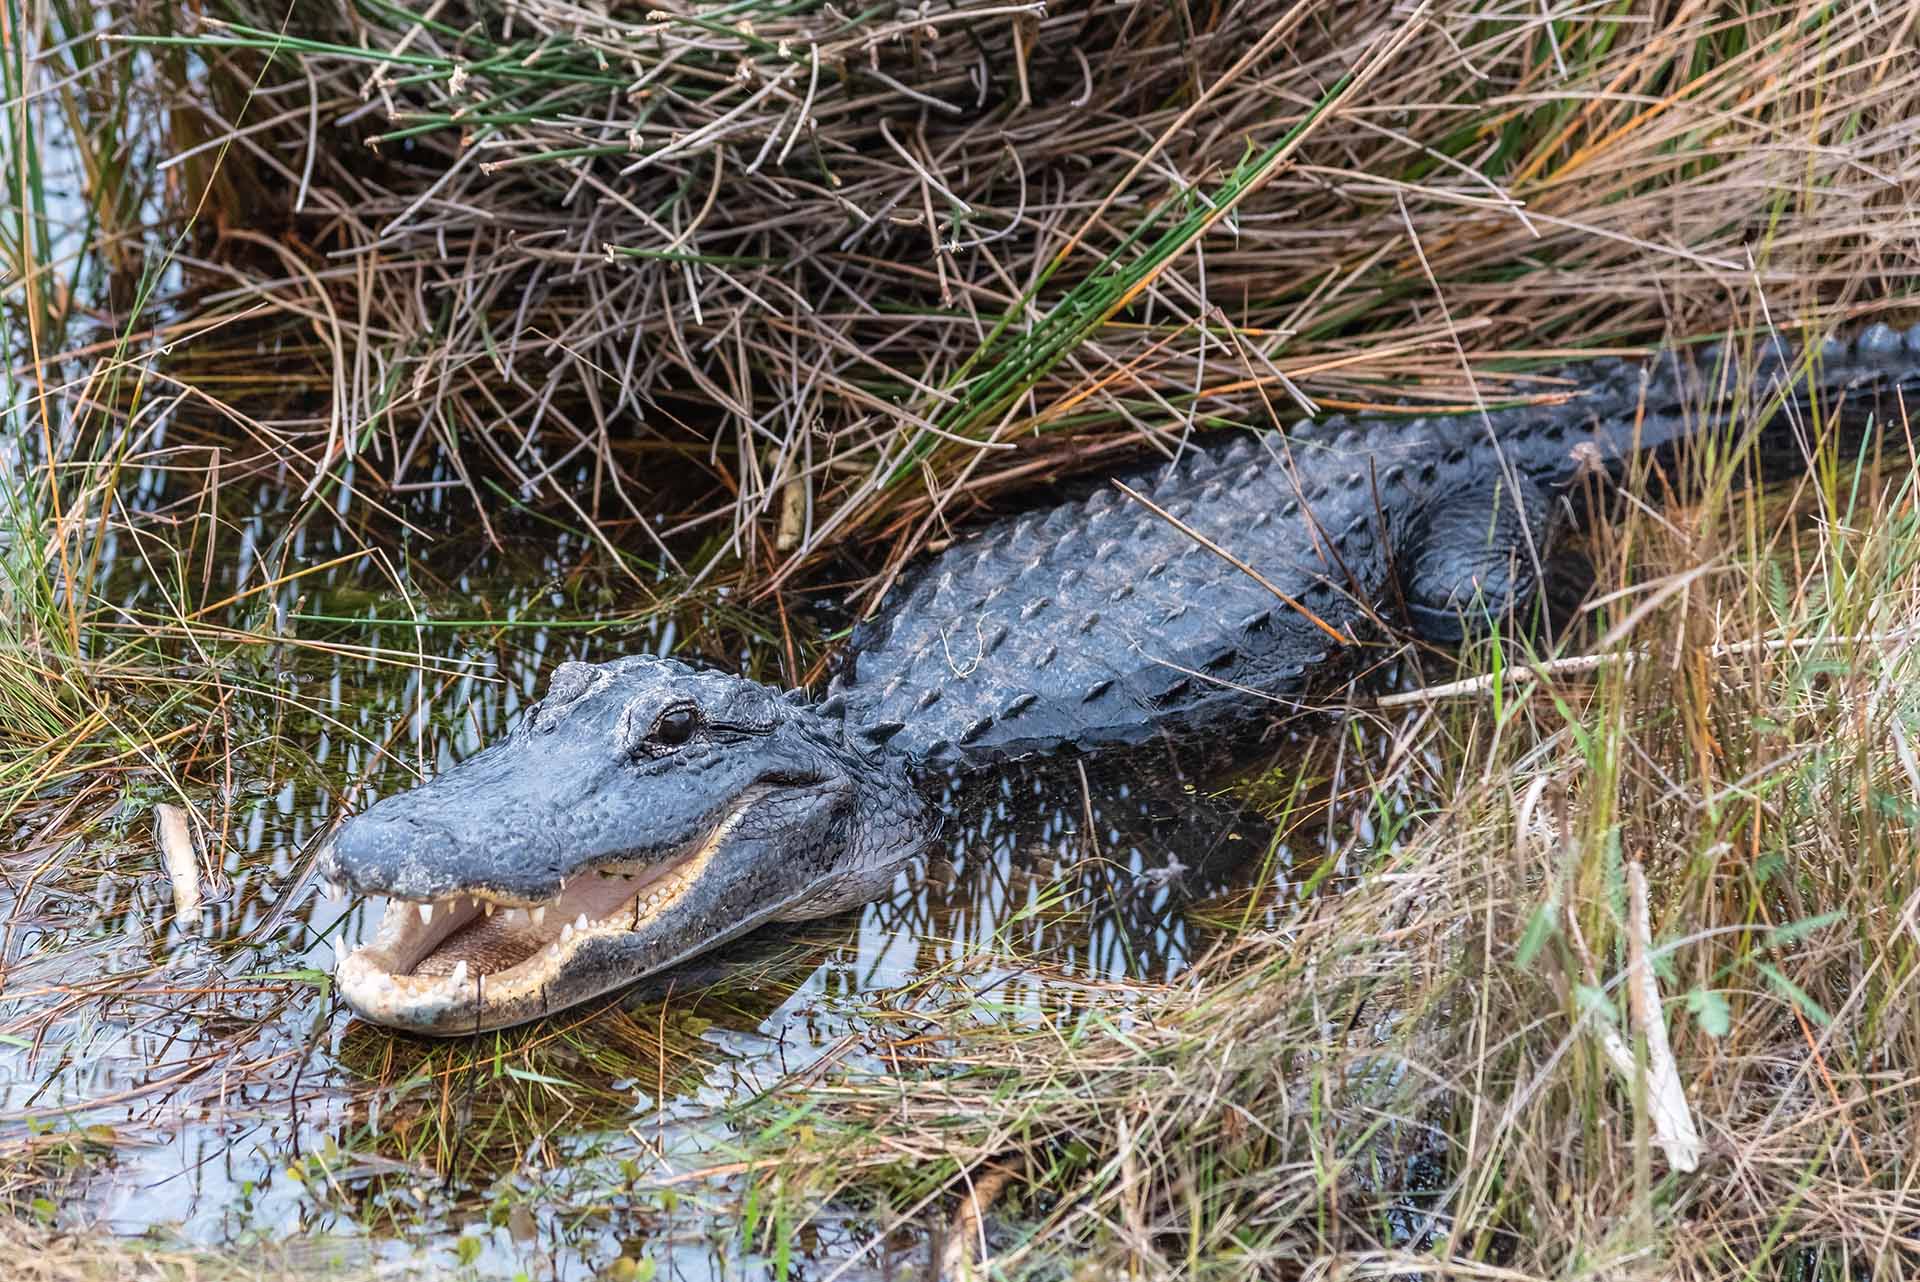 American alligator sitting in a swampy area